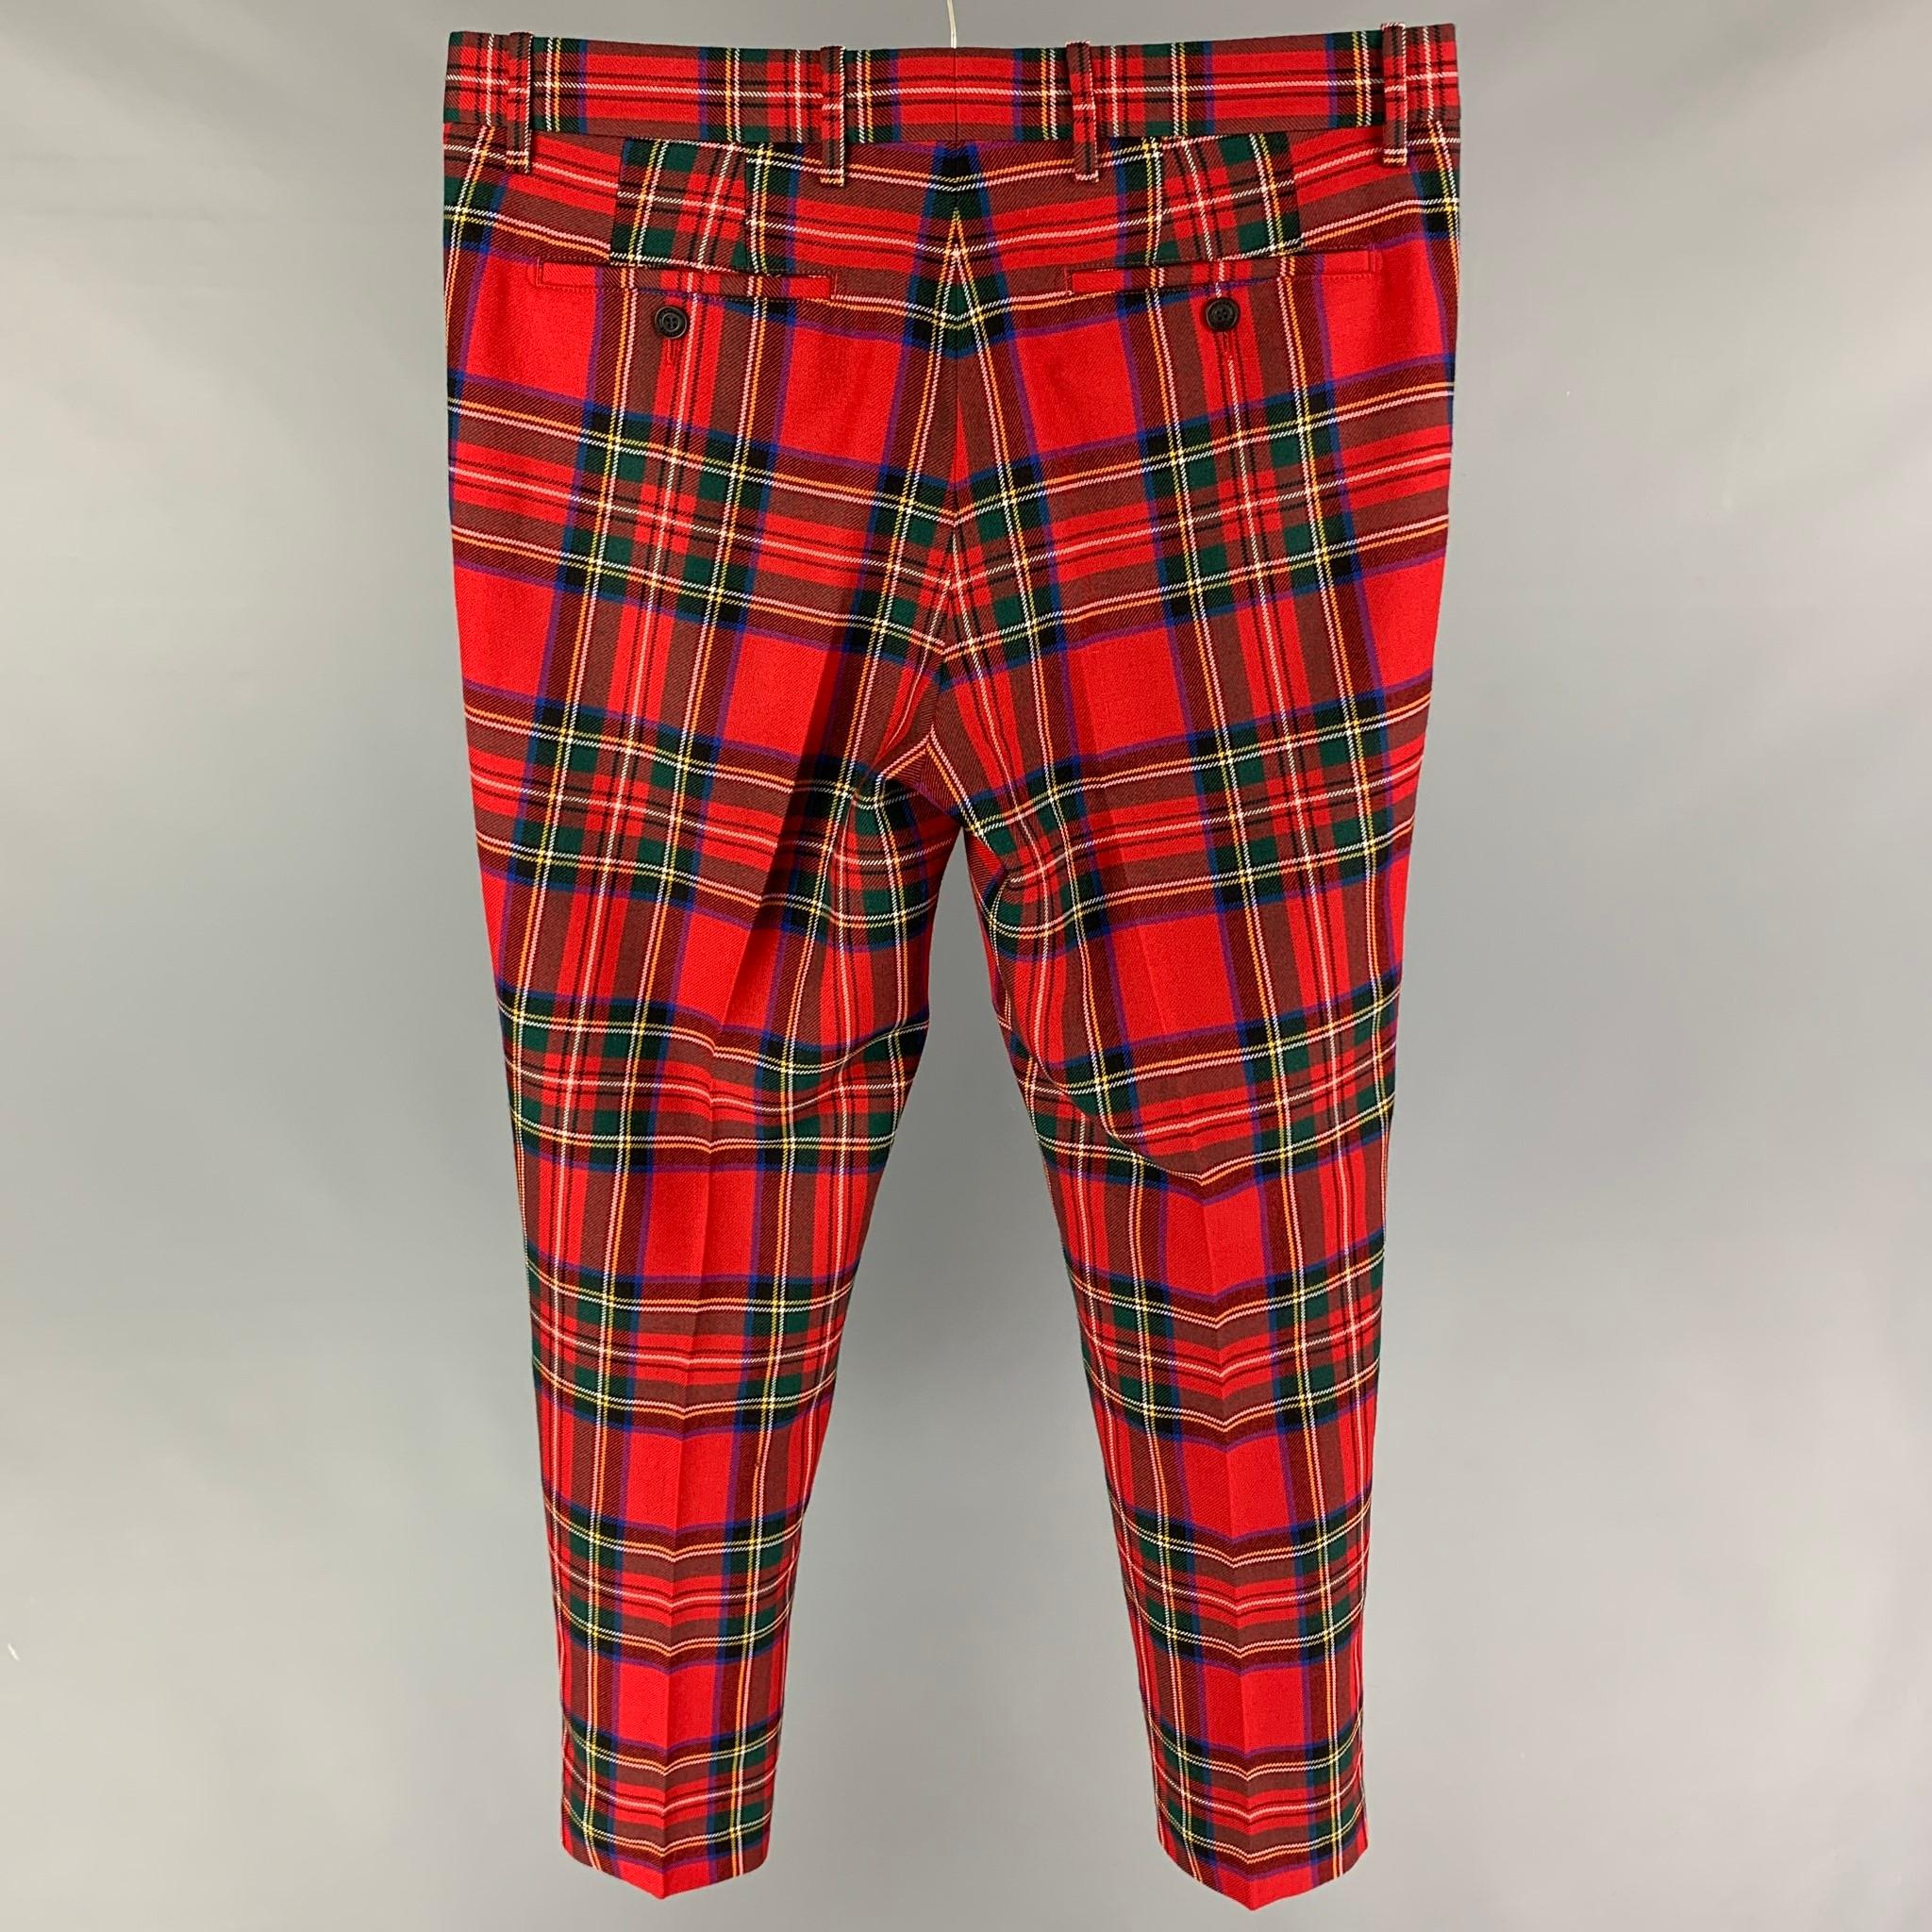 BURBERRY dress pants comes in a red multi-color plaid wool featuring a flat front, front tab, and a zip fy closure. Made in Romania. 

Excellent Pre-Owned Condition.
Marked: 52

Measurements:

Waist: 36 in.
Rise: 10.5 in.
Inseam: 29 in. 